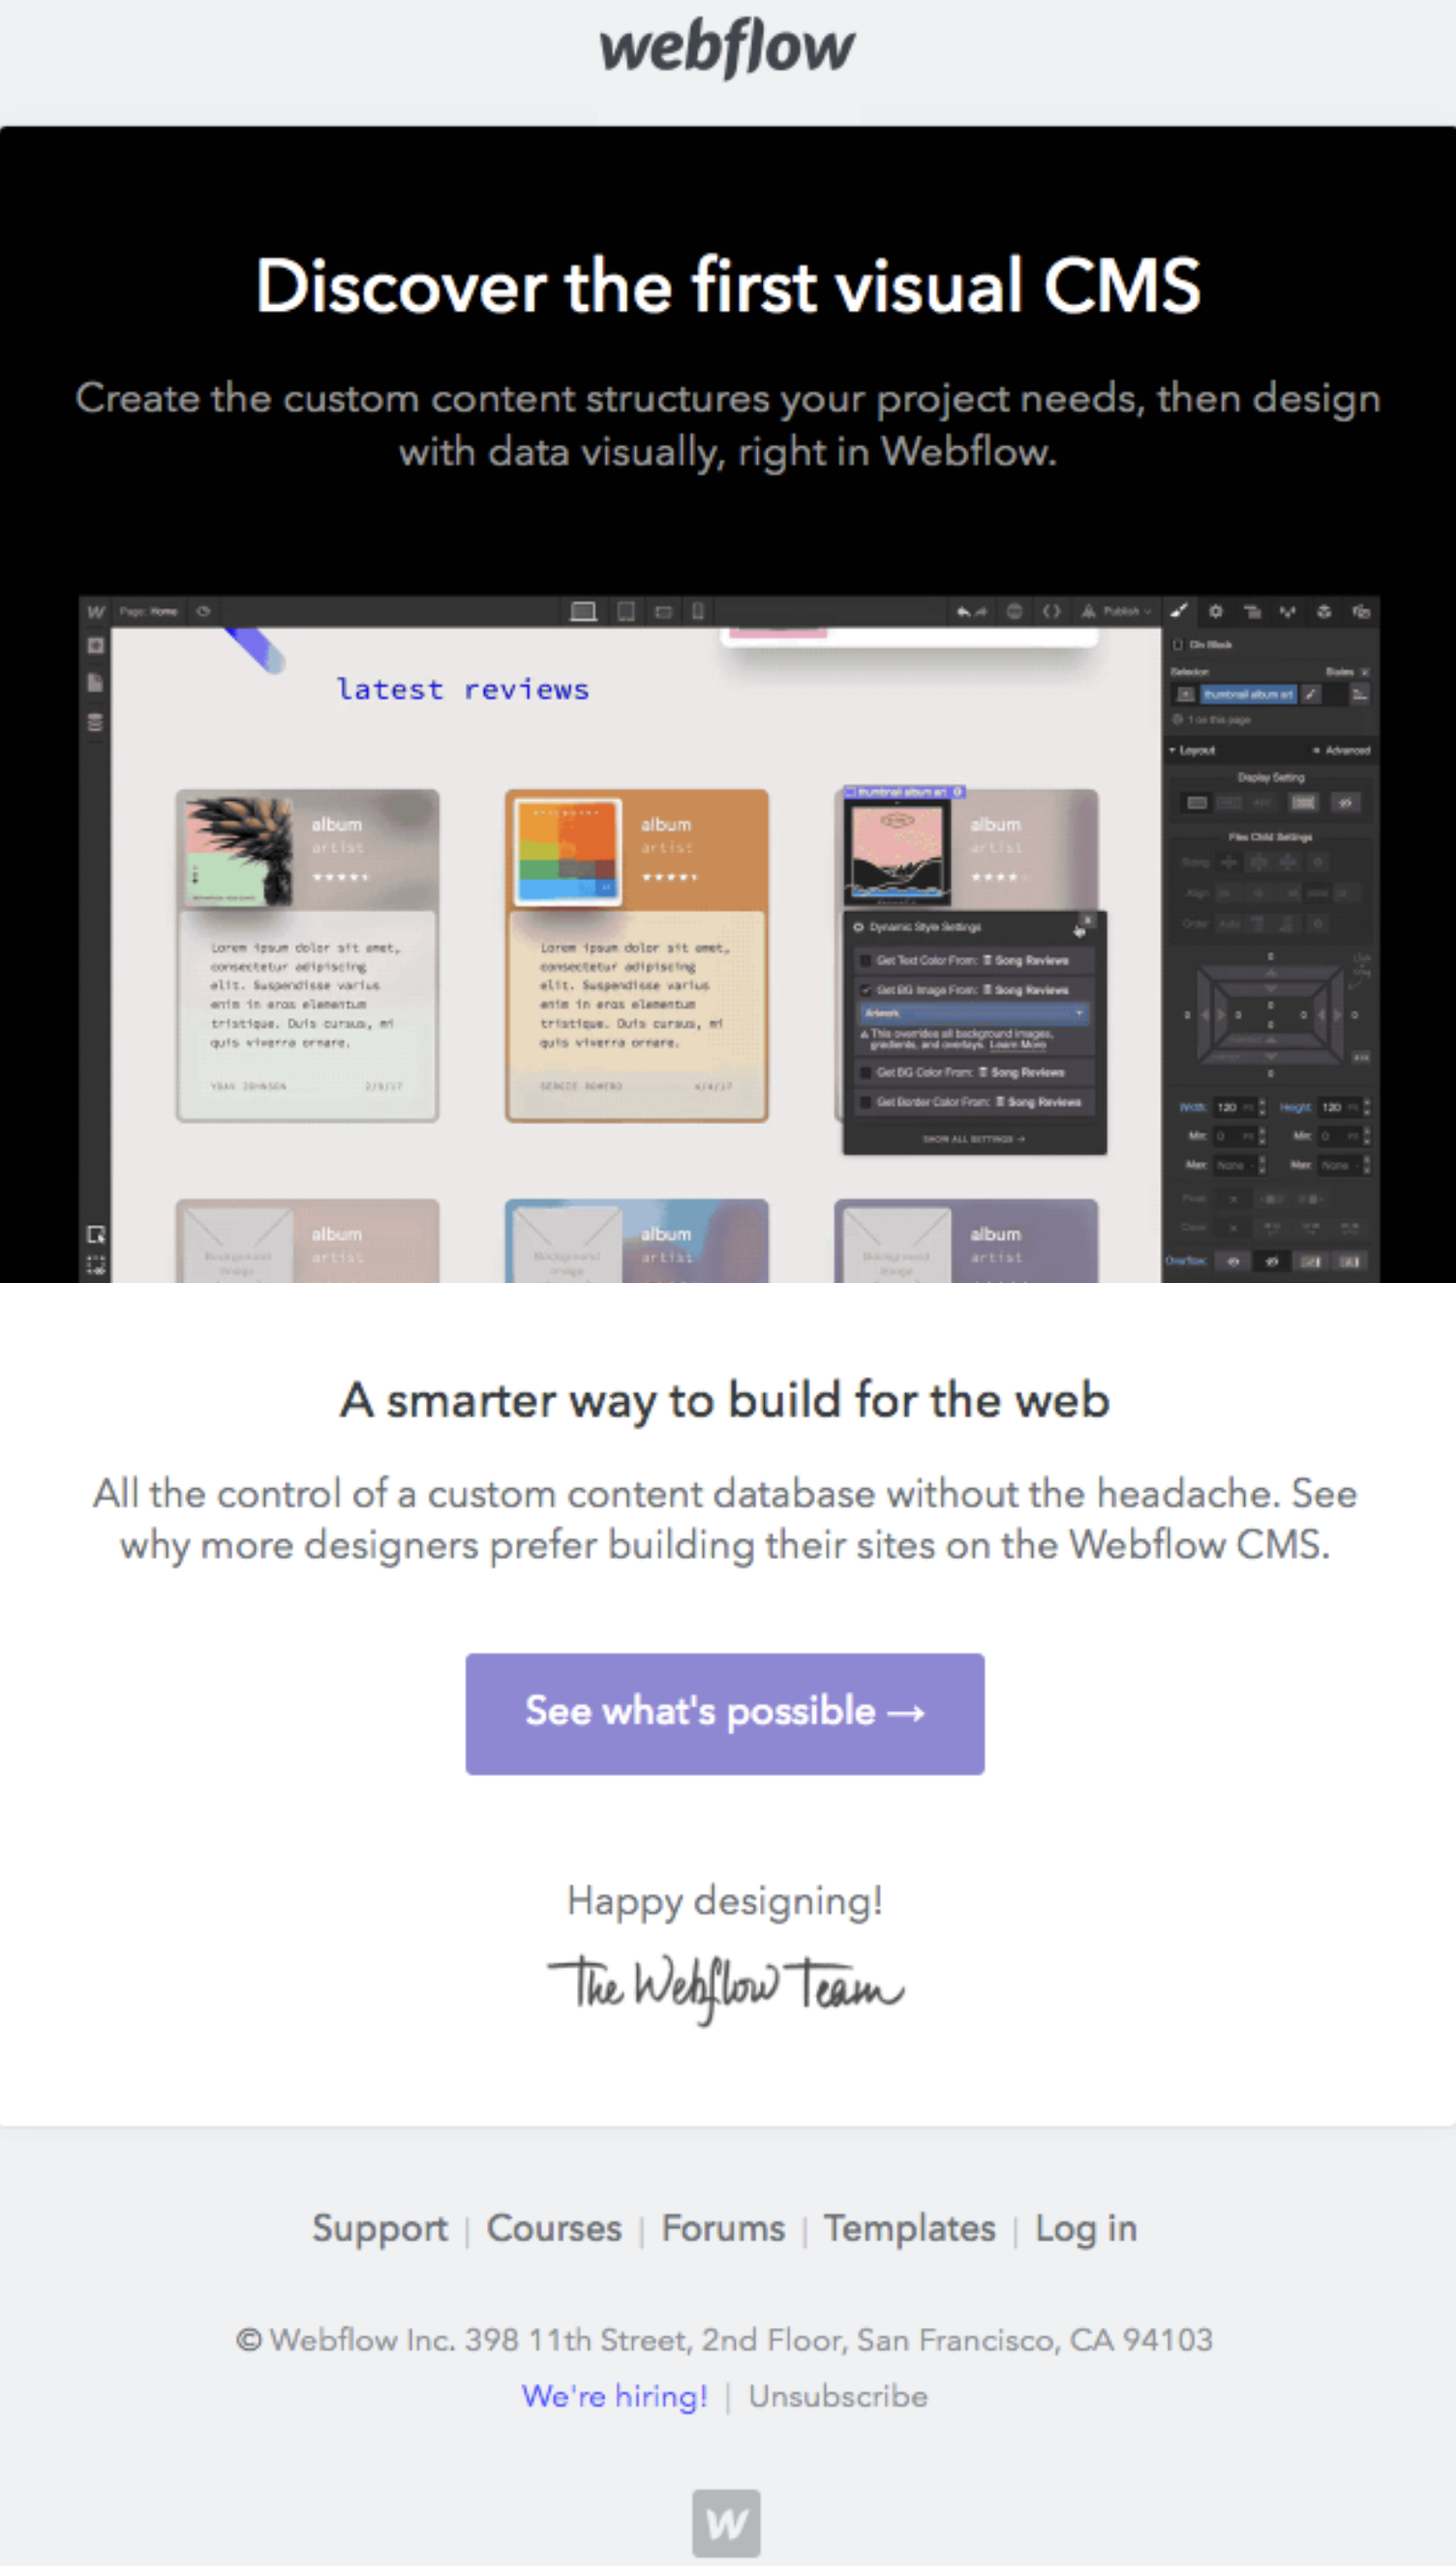 GIFs in SaaS Emails: Screenshot of Webflow's marketing email